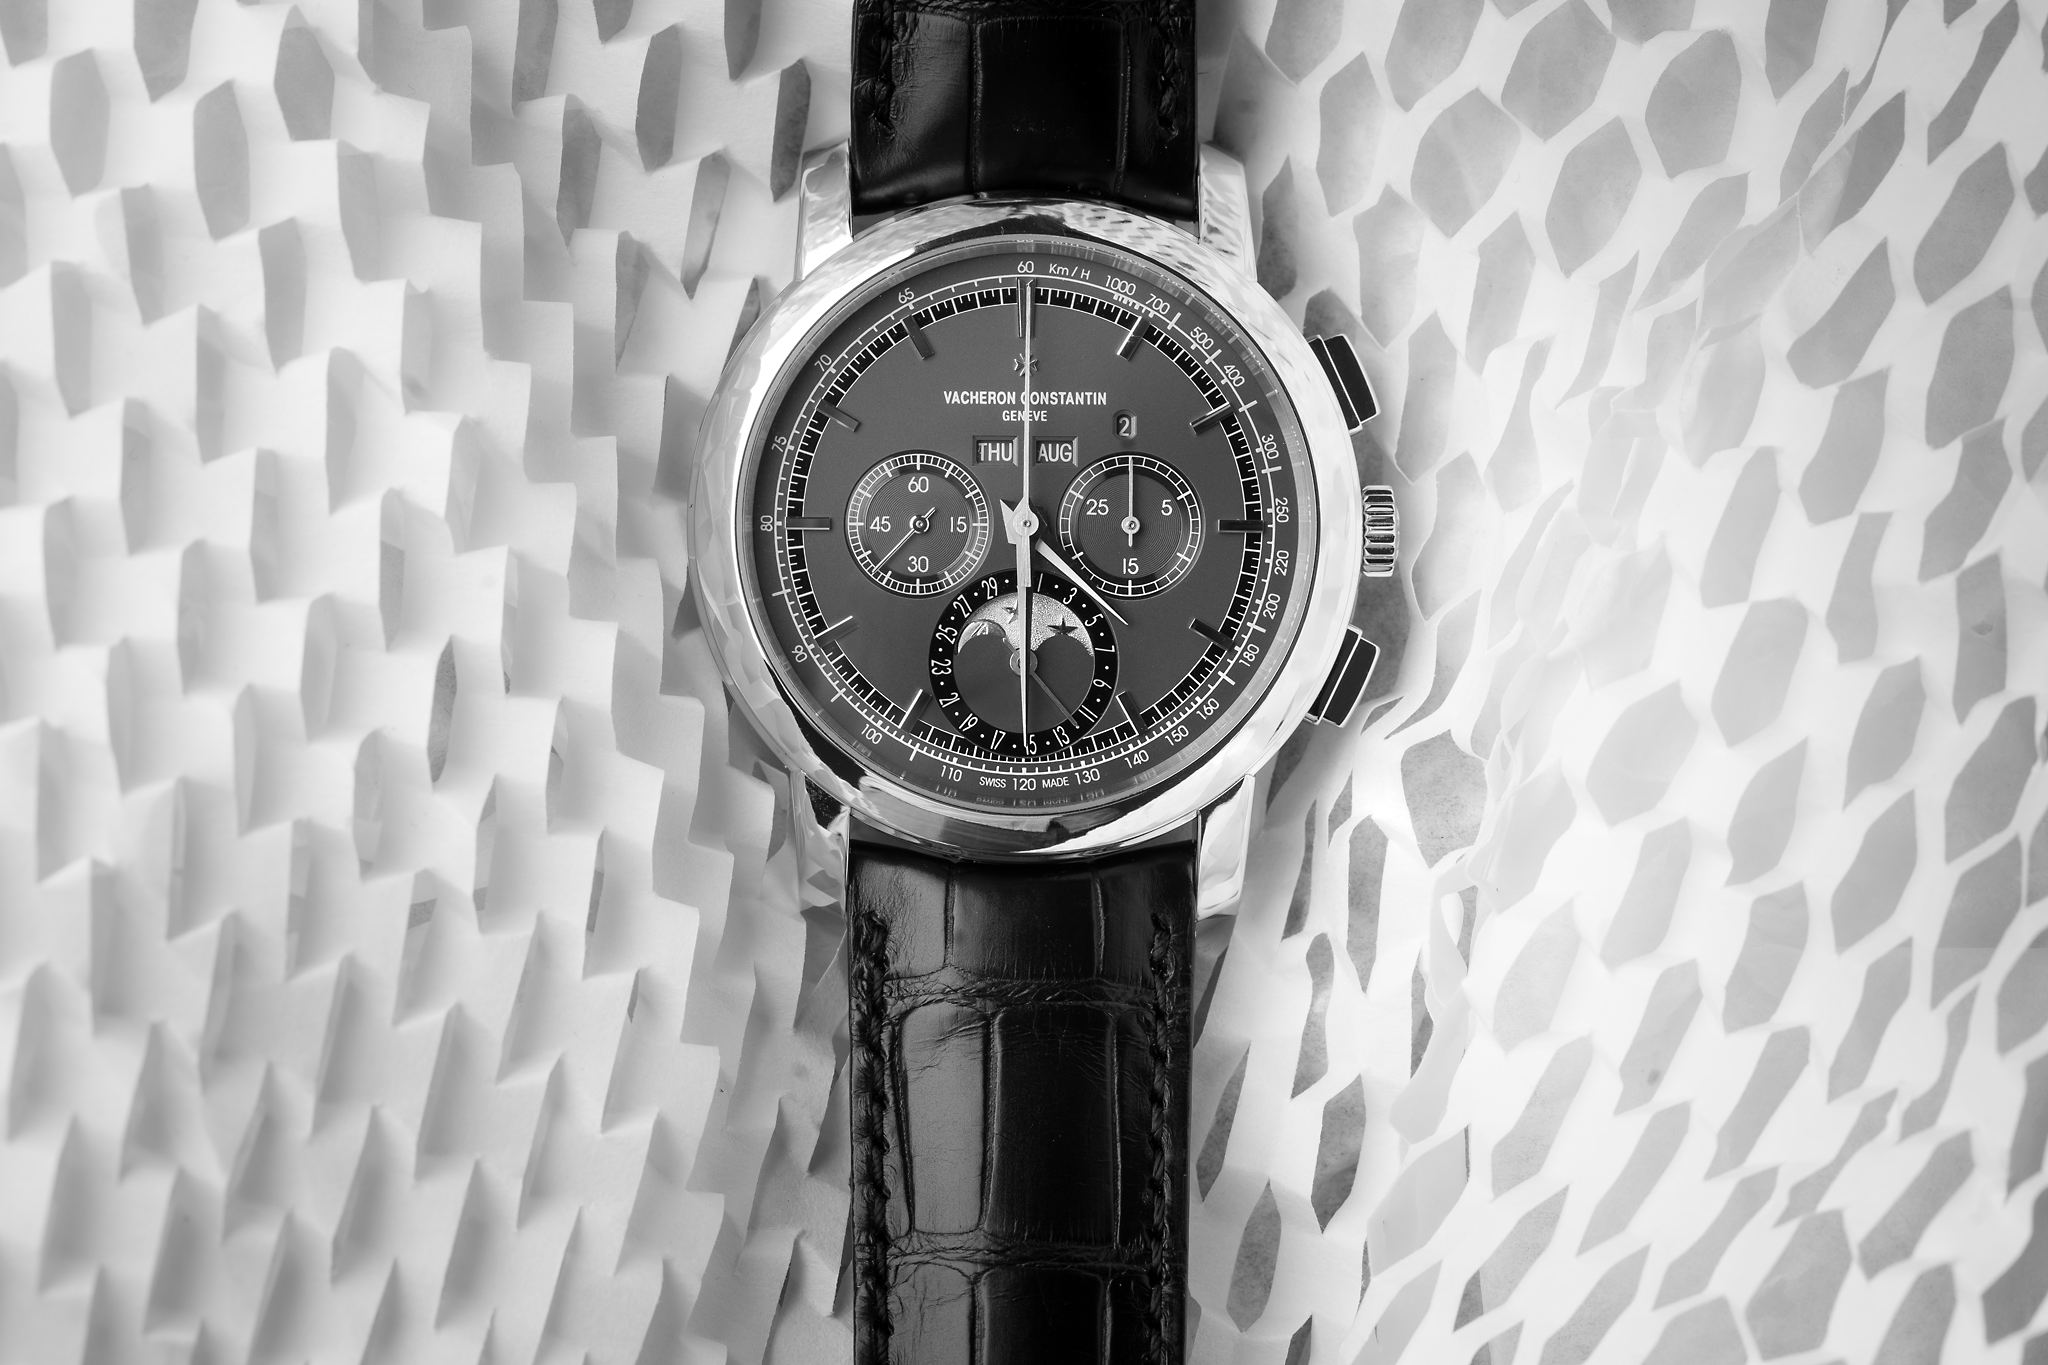 Vacheron Constantin Continues its Traditionnelle Line with Chrono Perpetual Calendar